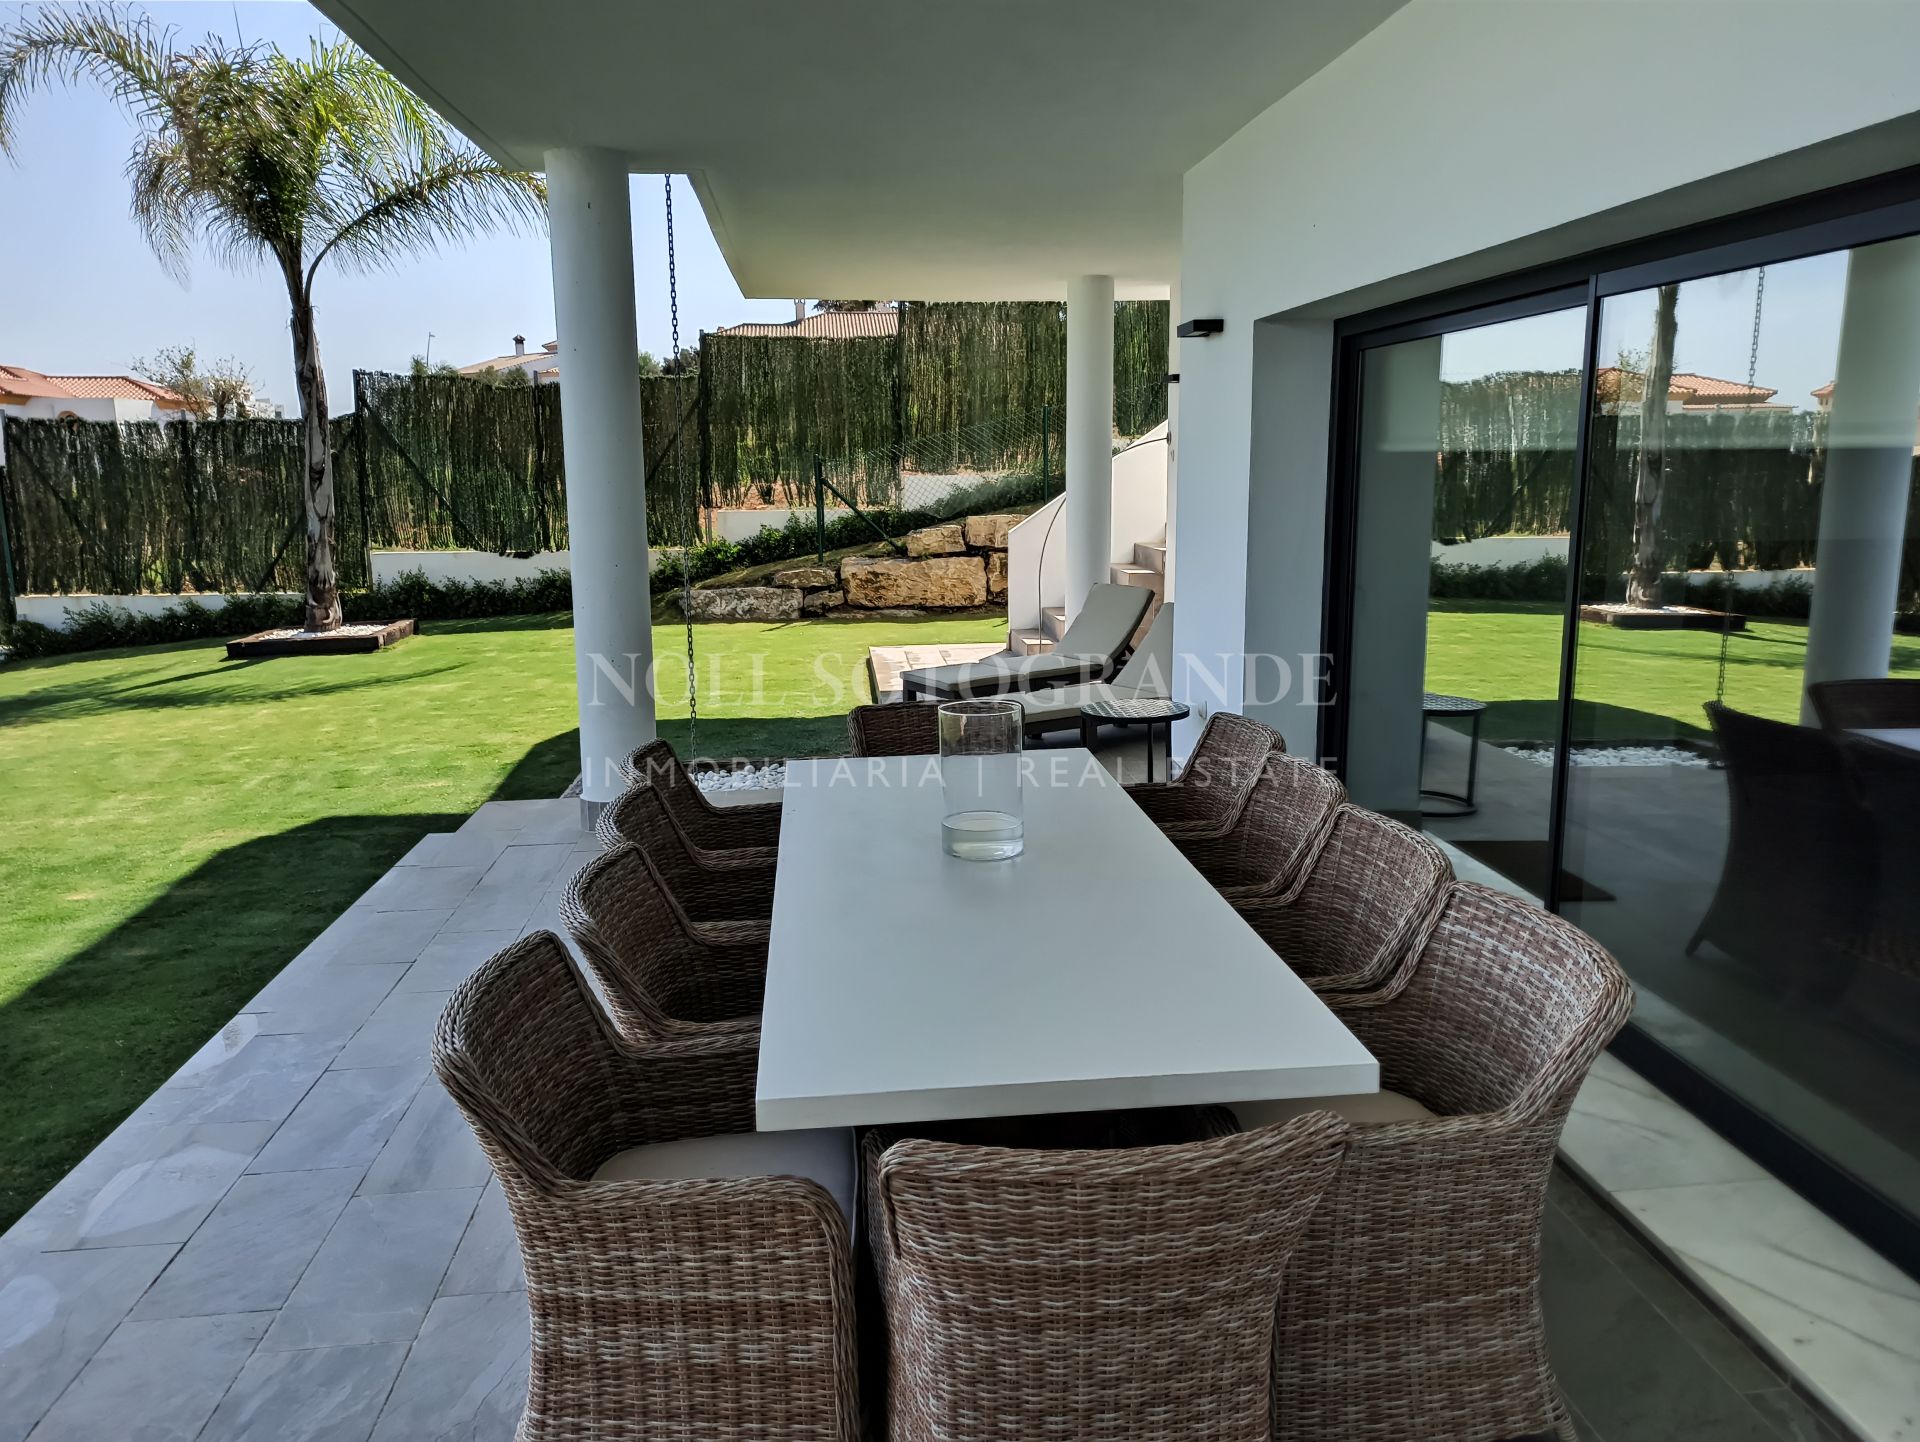 Villa with spectacular views for rent in Alcaidesa